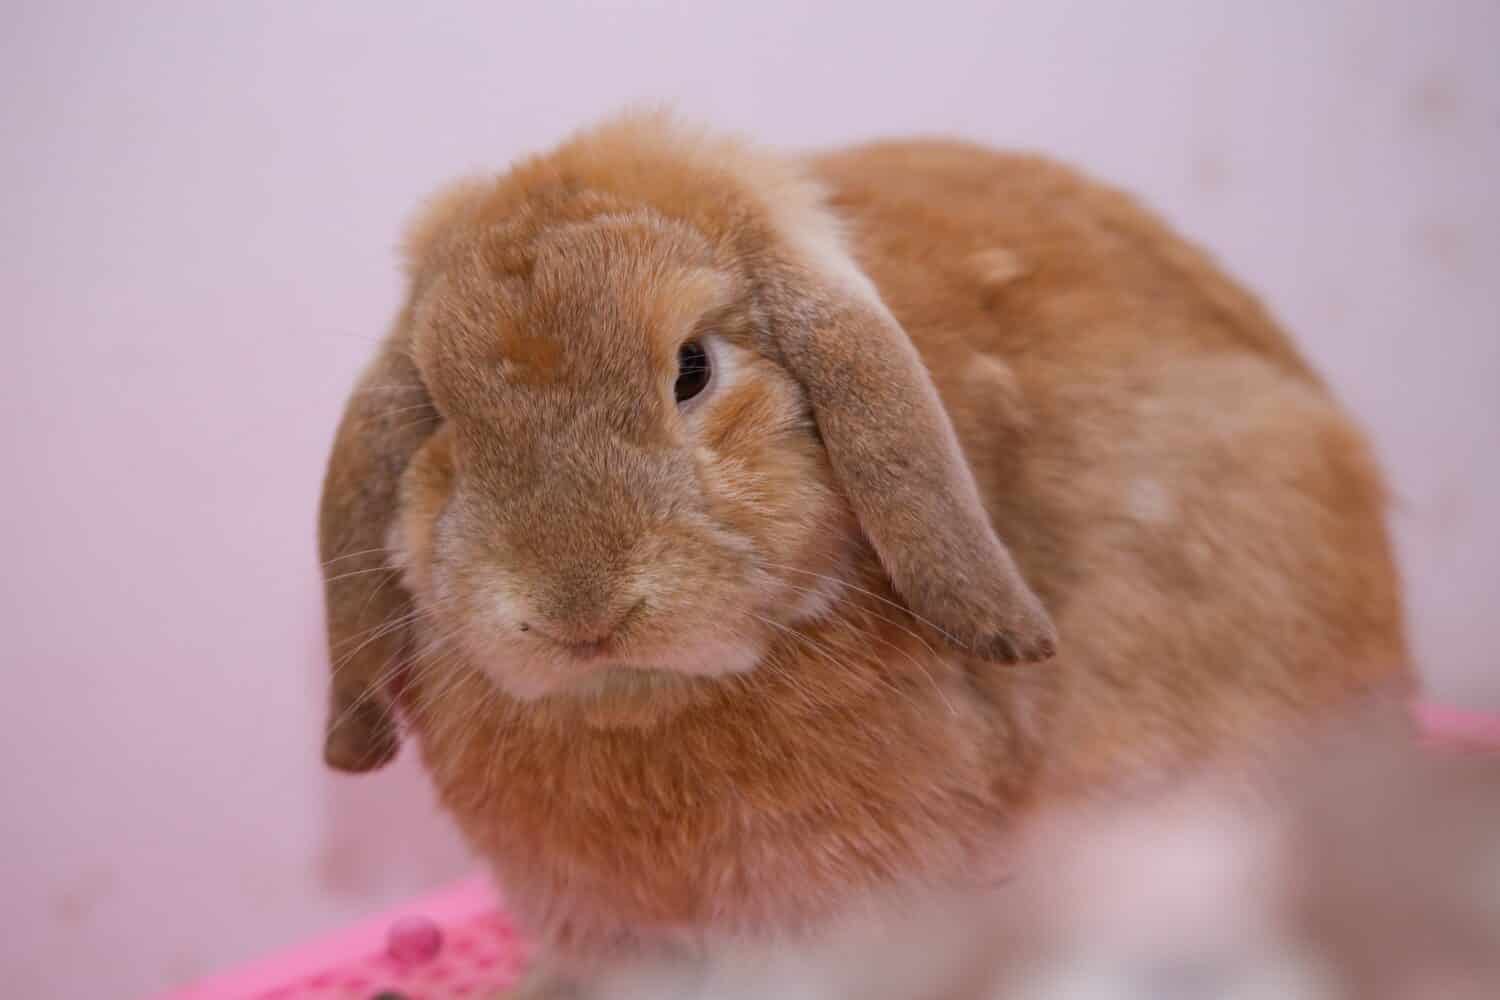 Baby orange holland lop rabbit sitting on pink background. Lovely action of young rabbit.